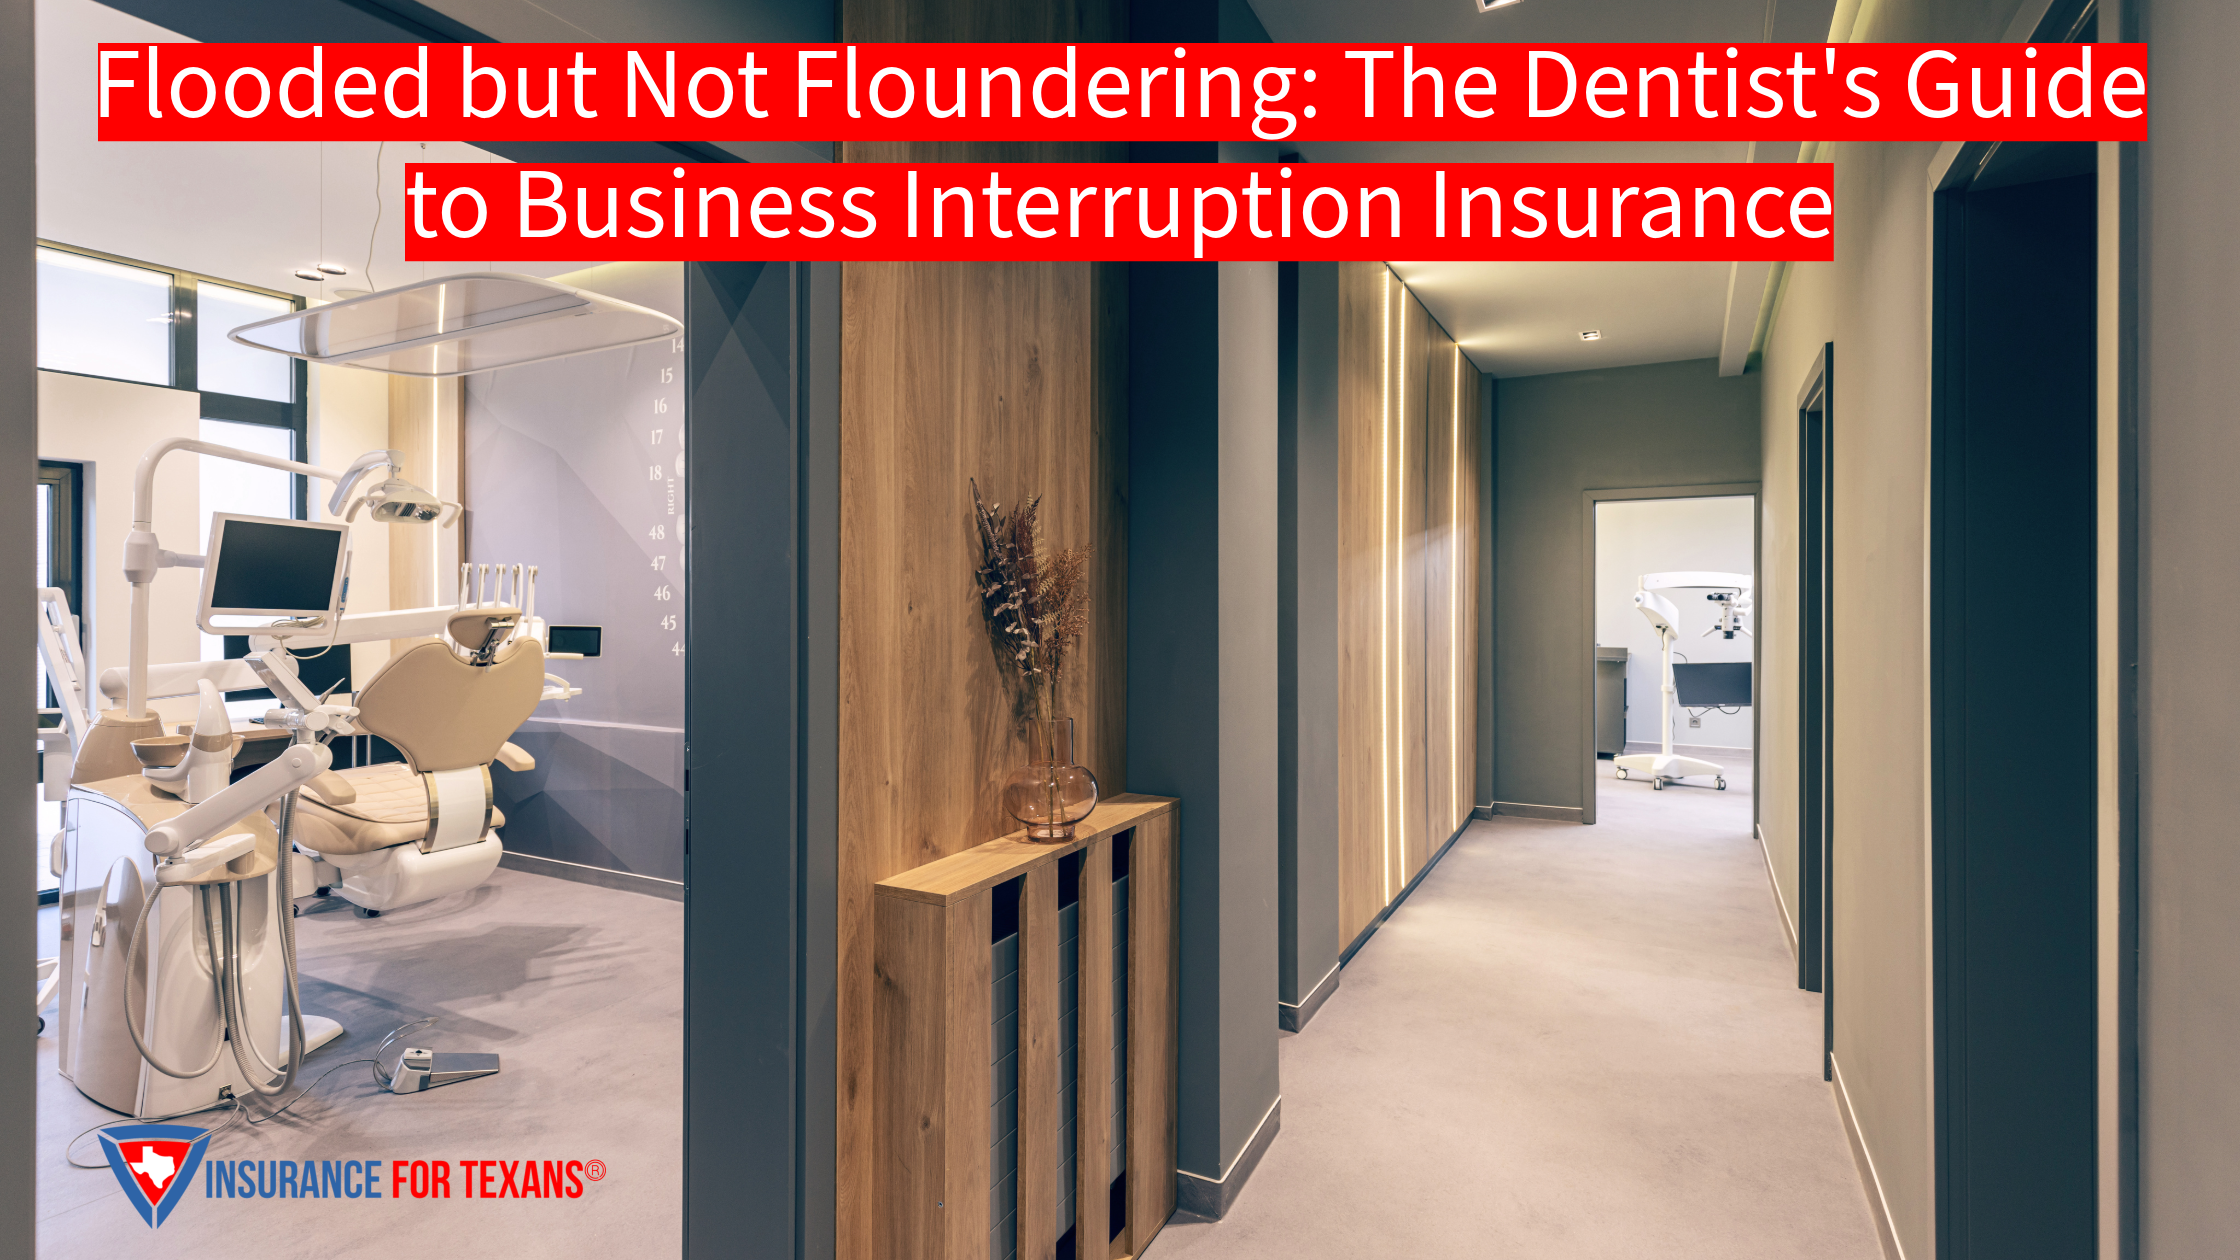 Flooded but Not Floundering: The Dentist's Guide to Business Interruption Insurance